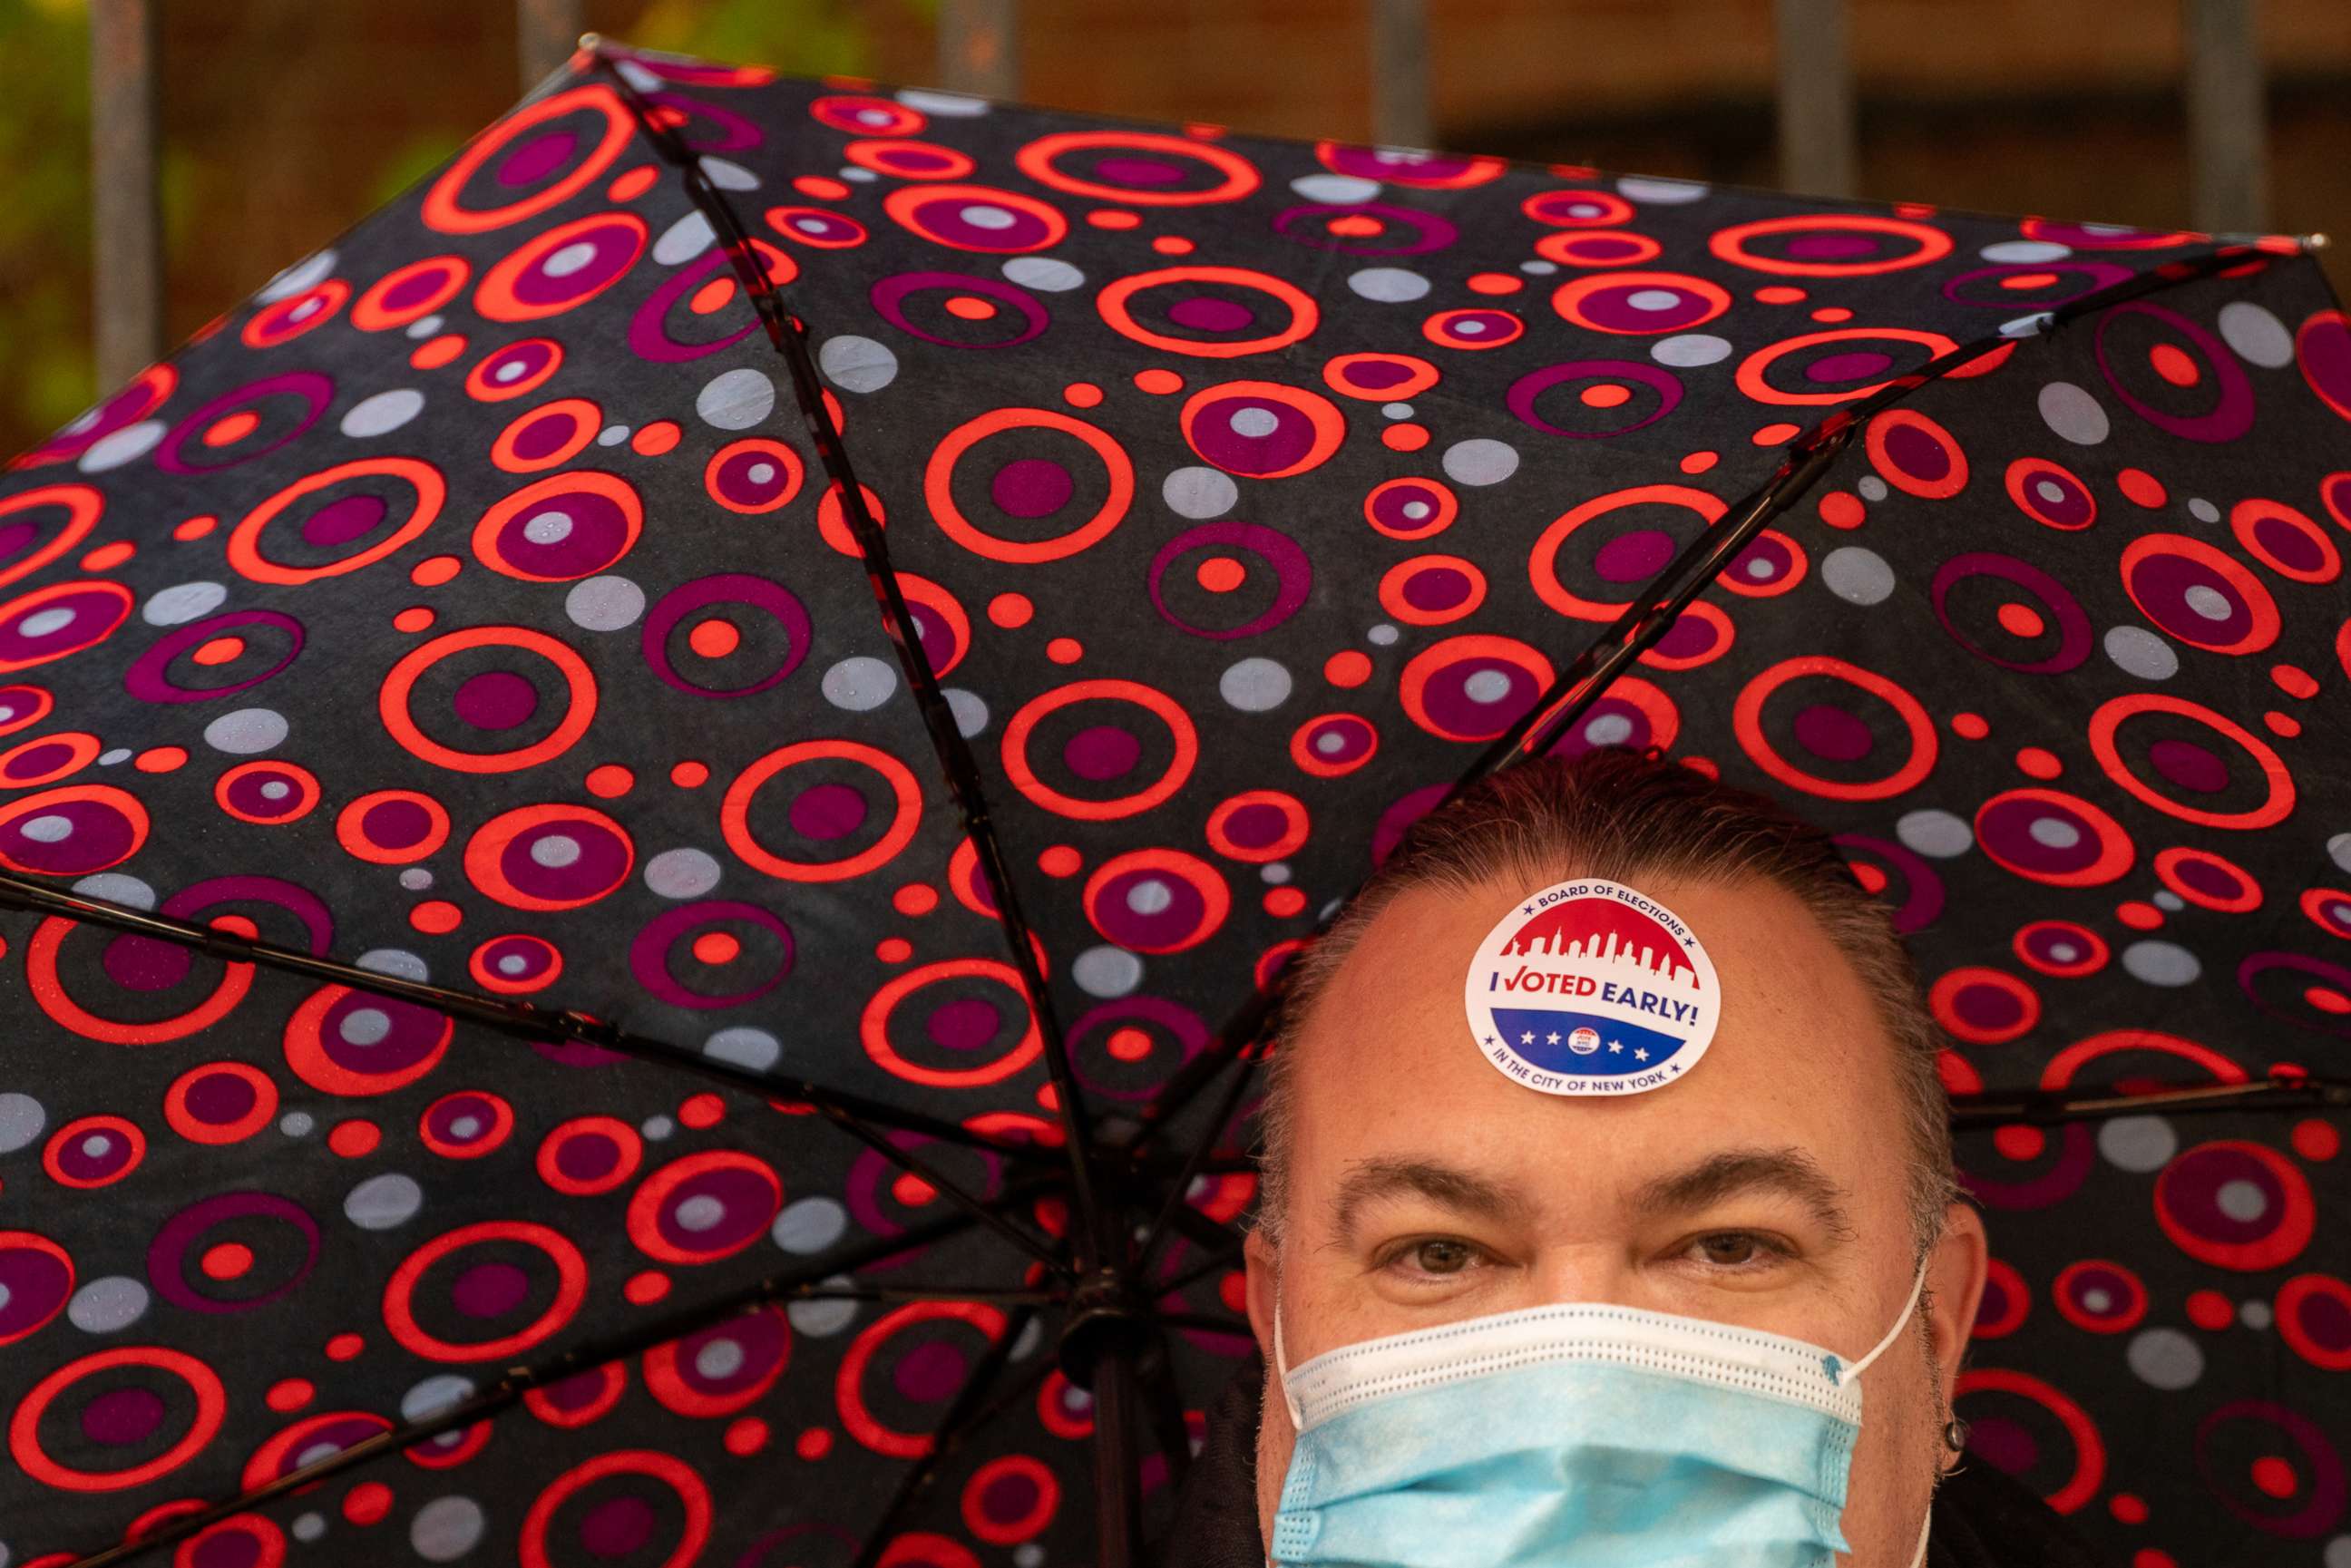 PHOTO: A person carries an umbrella and wears a mask at a polling station in Hunter-Bellevue School of Nursing on Nov. 1, 2020, in New York.